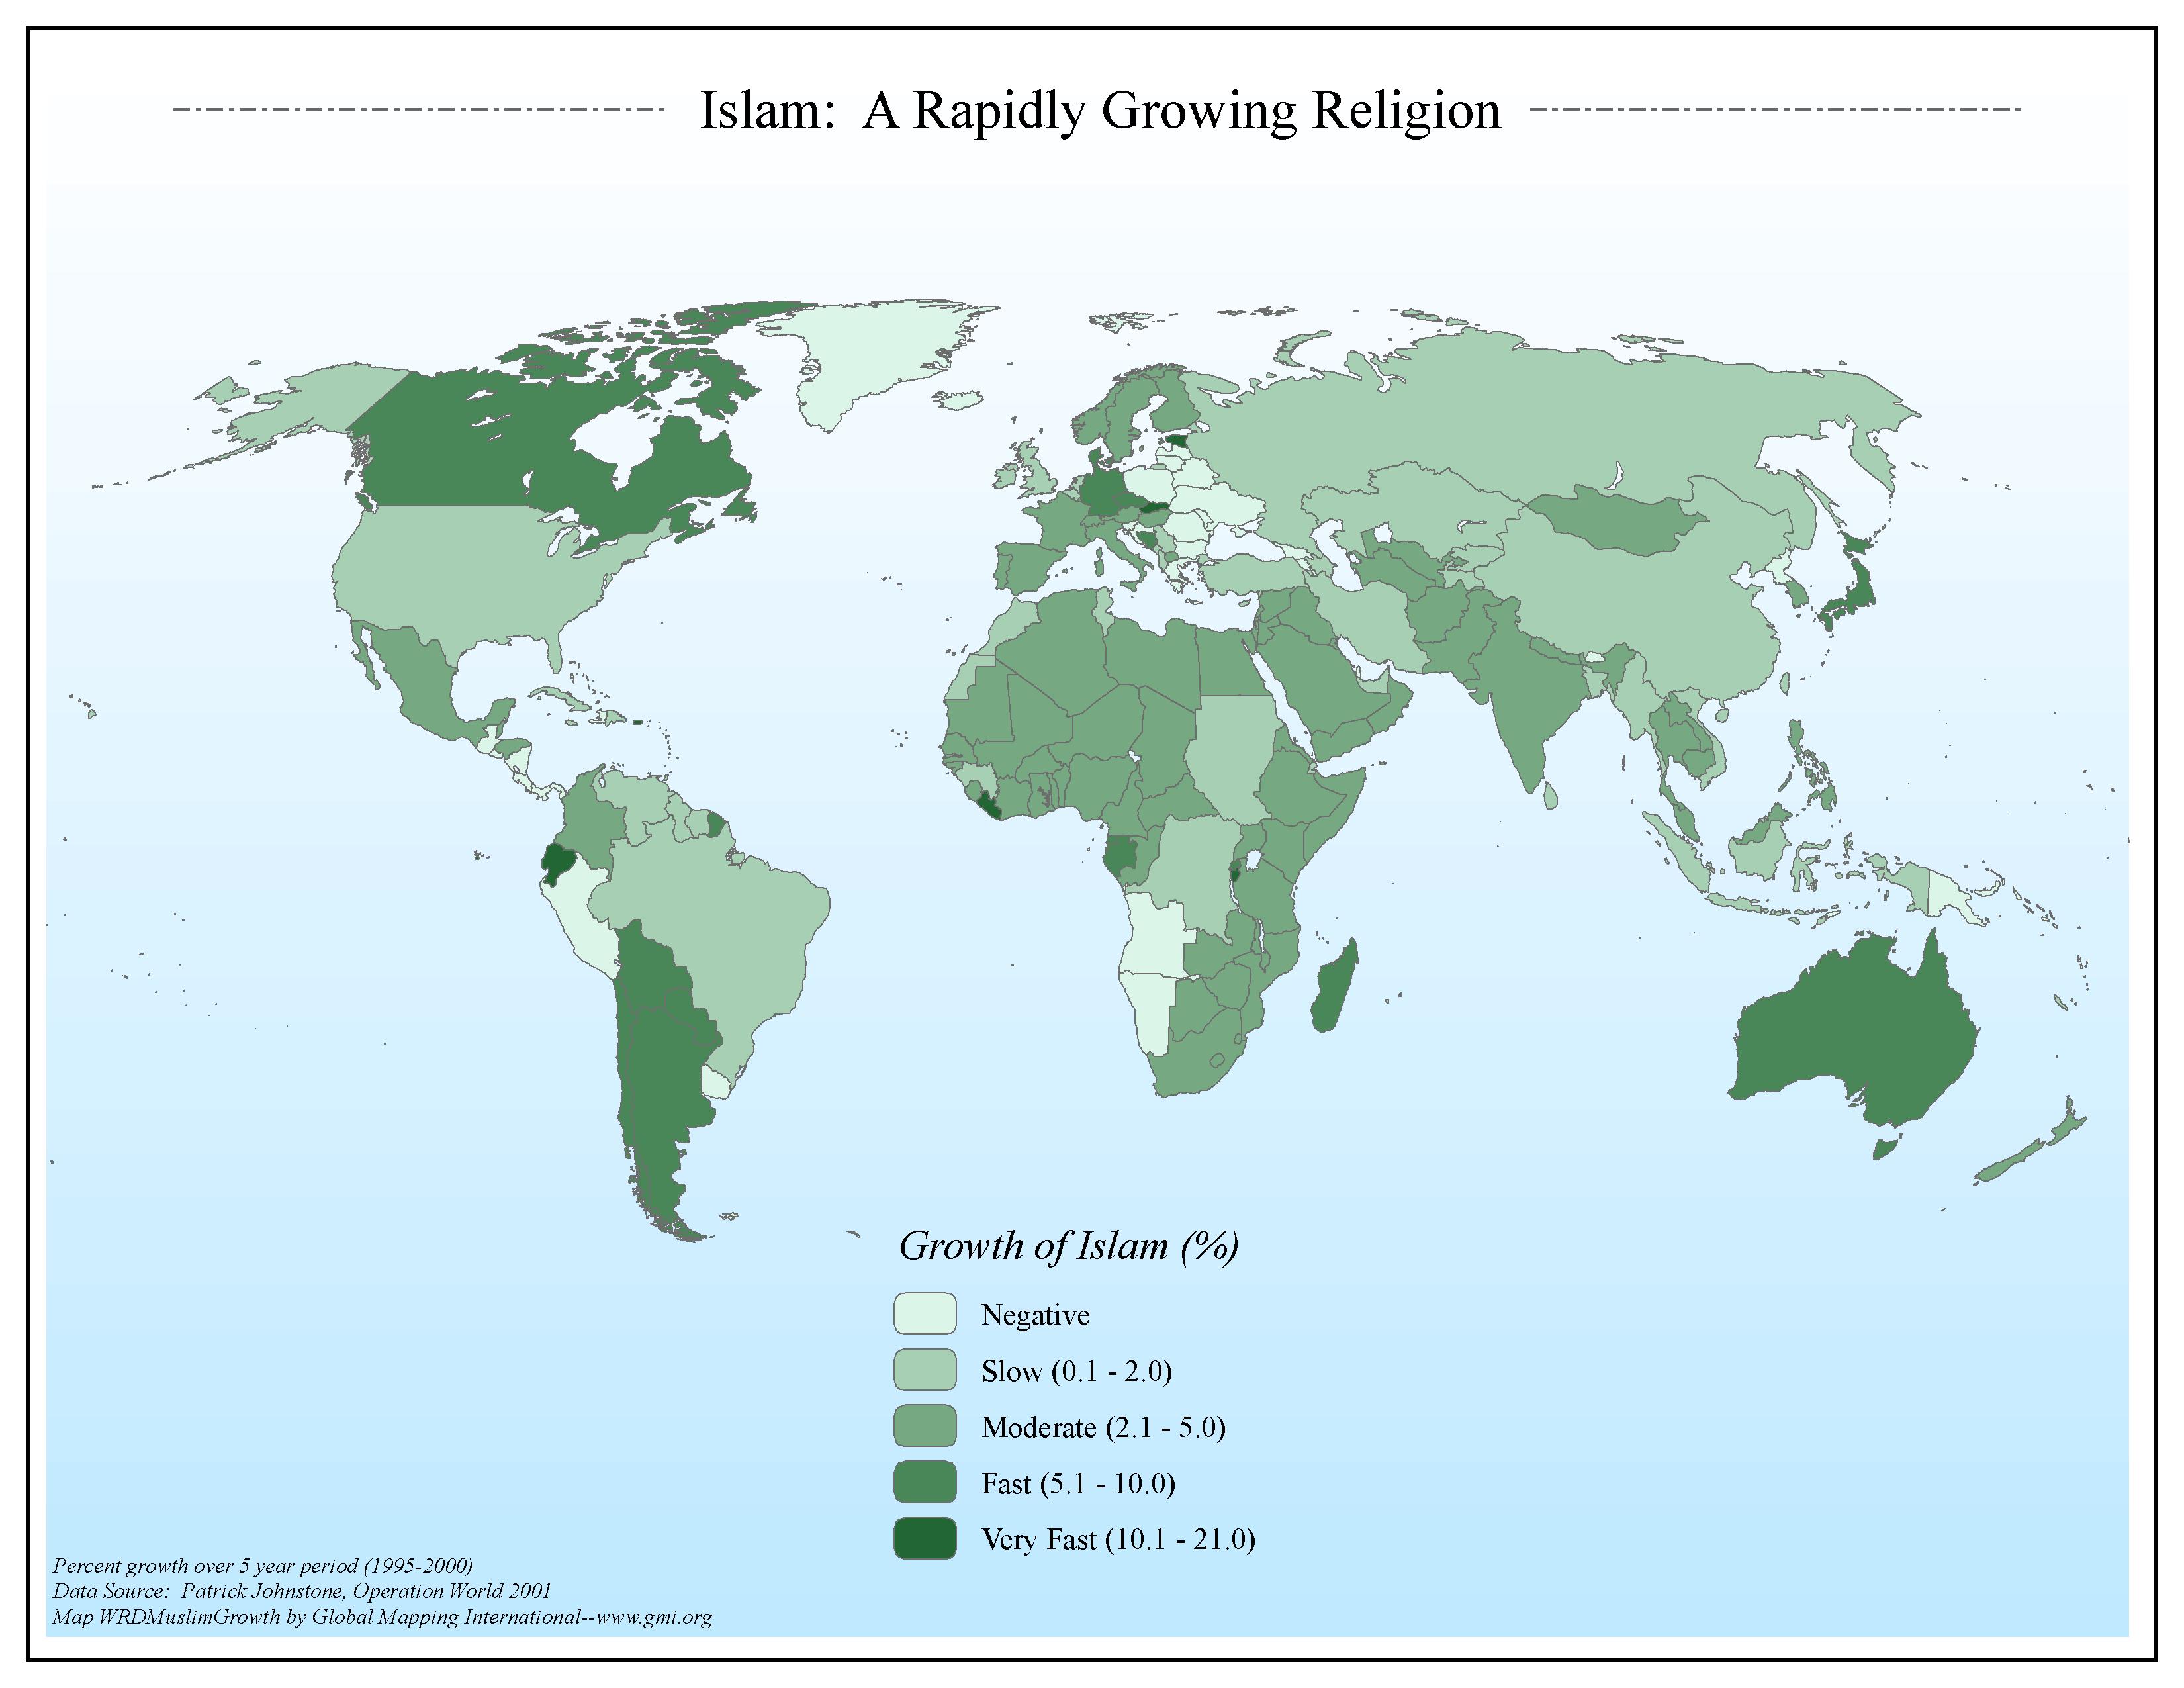 Islam: A Rapidly Growing Religion